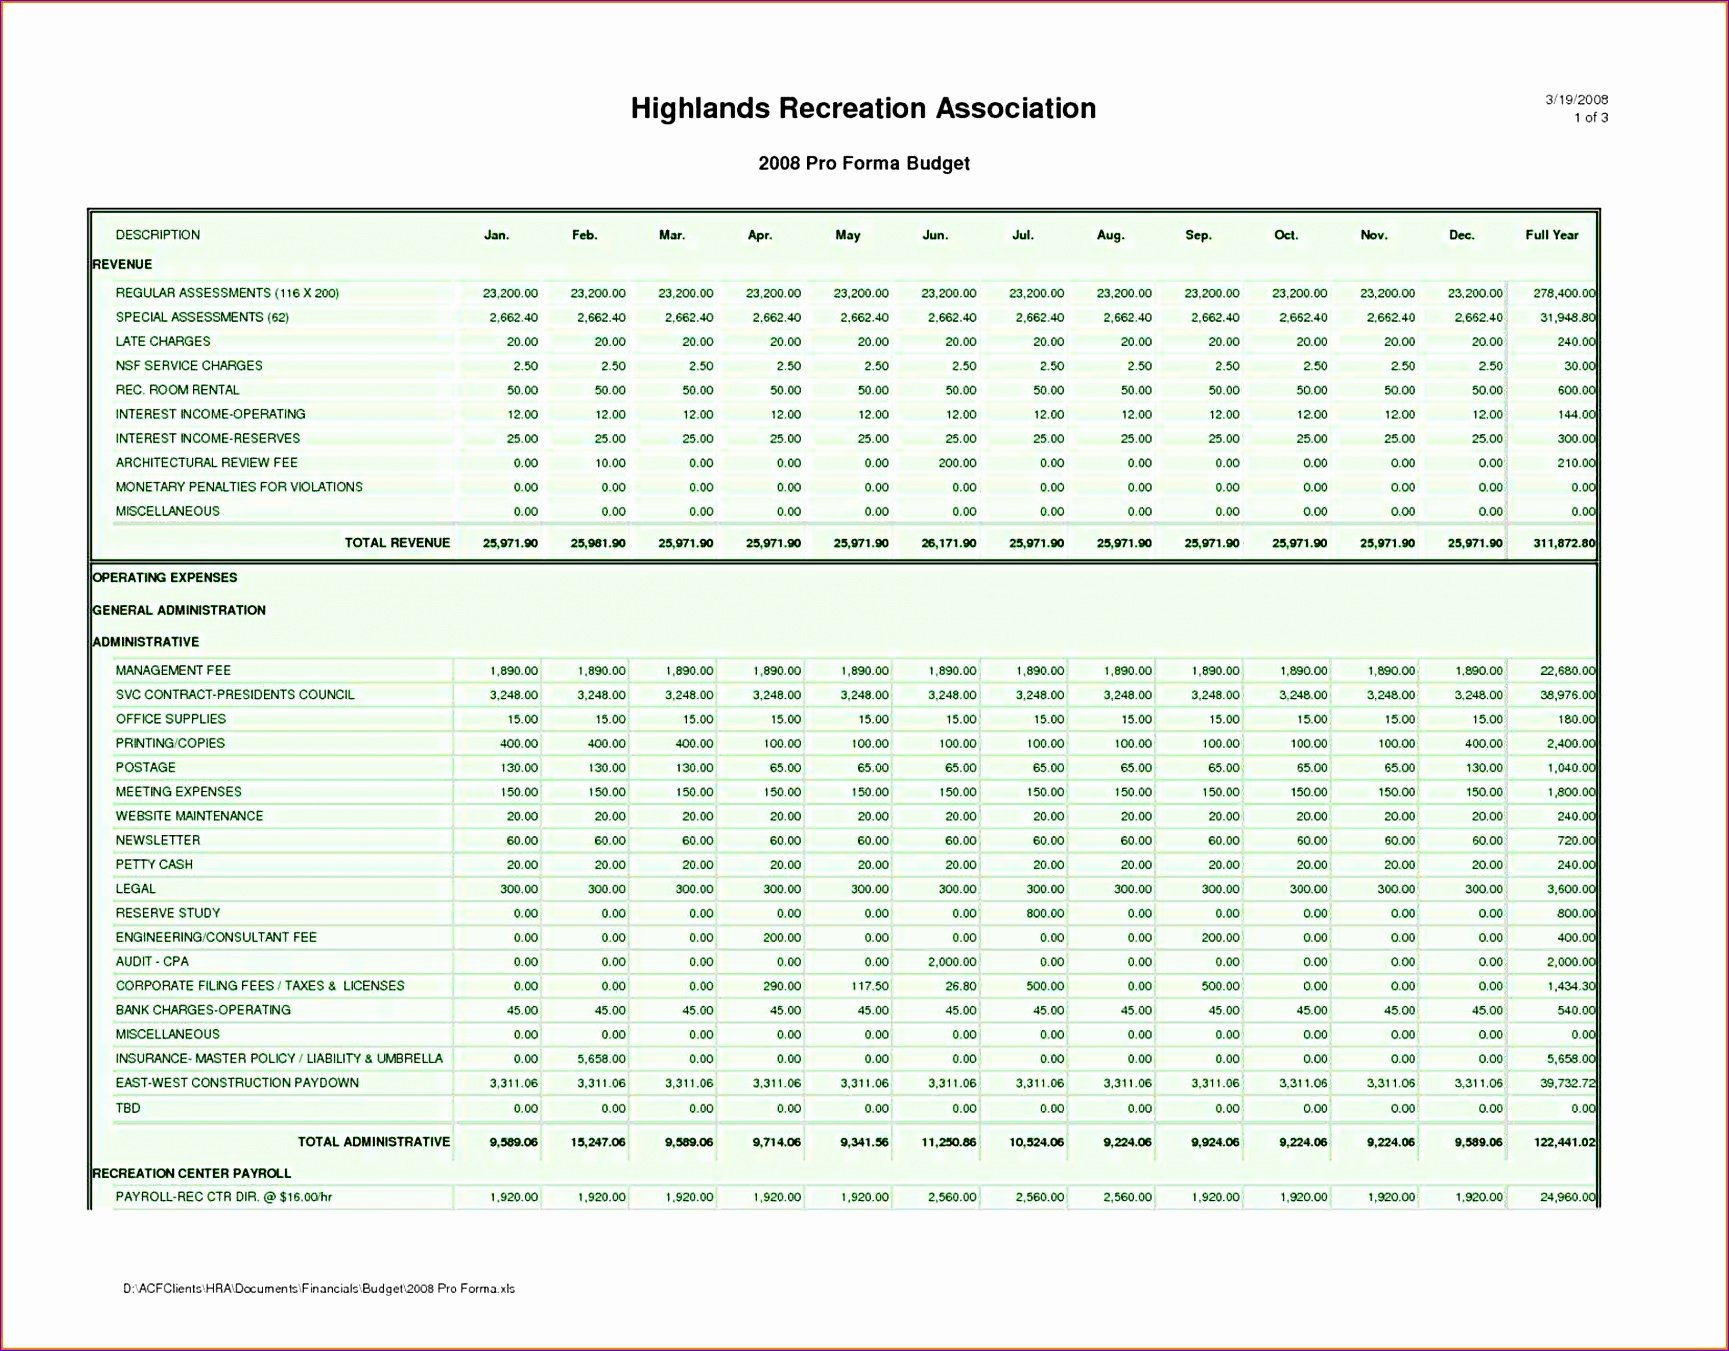 6 Business Financial Statement Template Excel